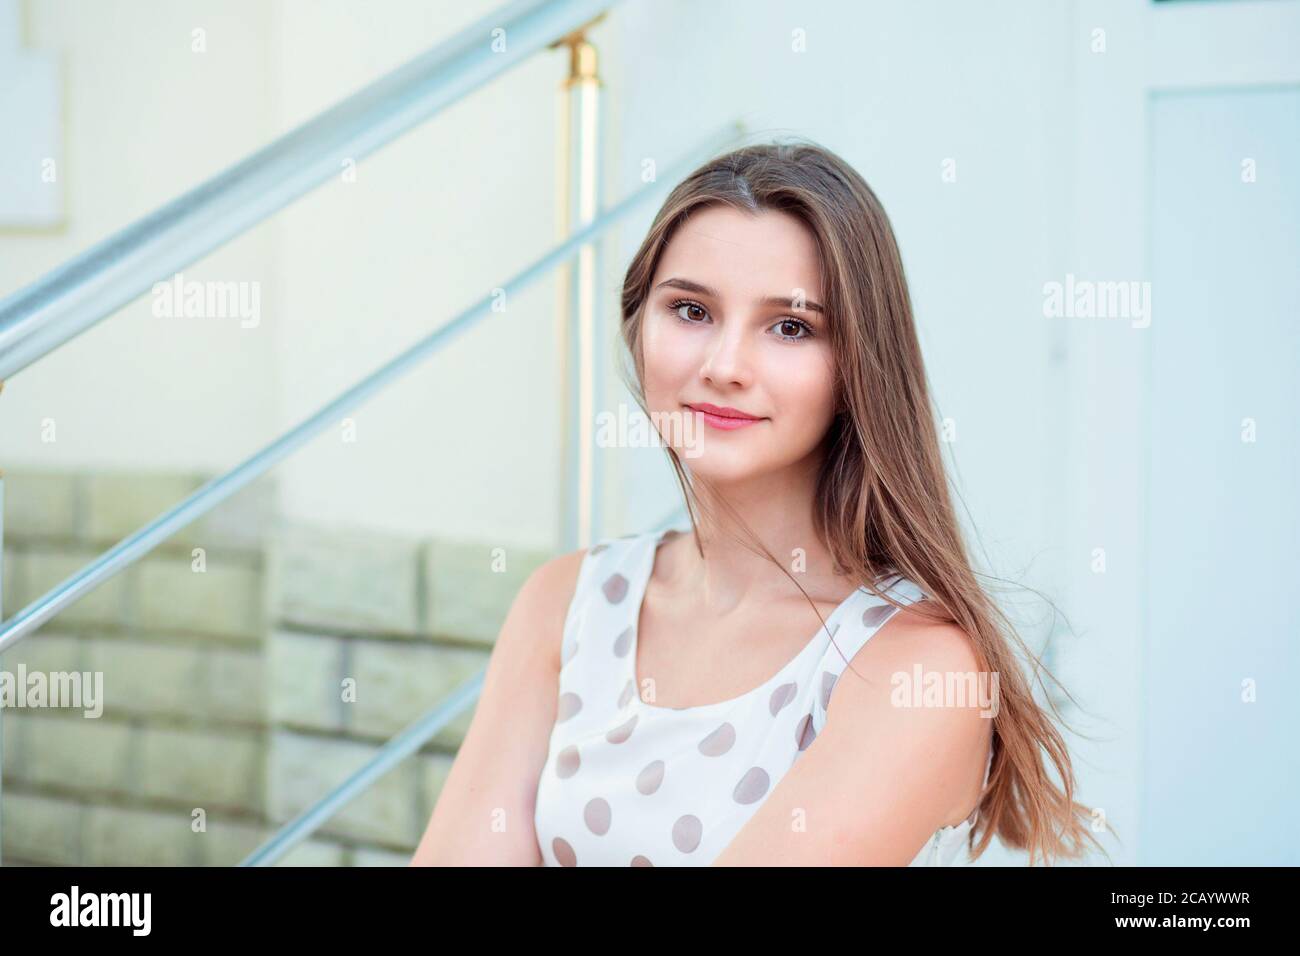 Teen girl with long brunette hair smiling sitting on steps Beautiful young girl in white dress  